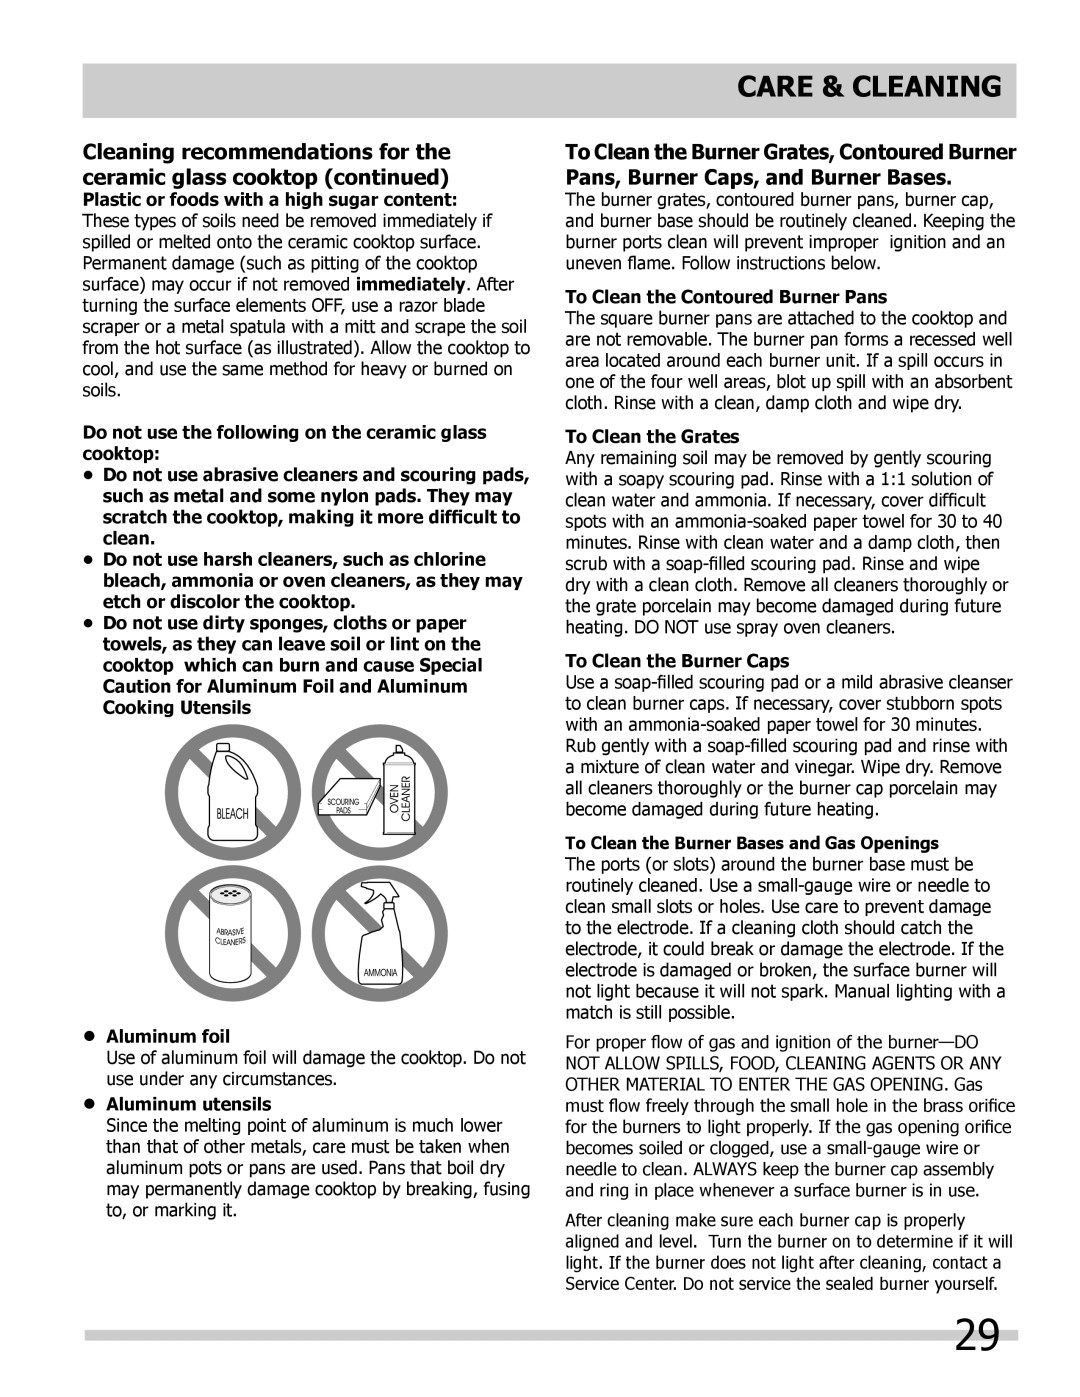 Frigidaire FPDF4085KF important safety instructions Care & Cleaning, Aluminum foil 